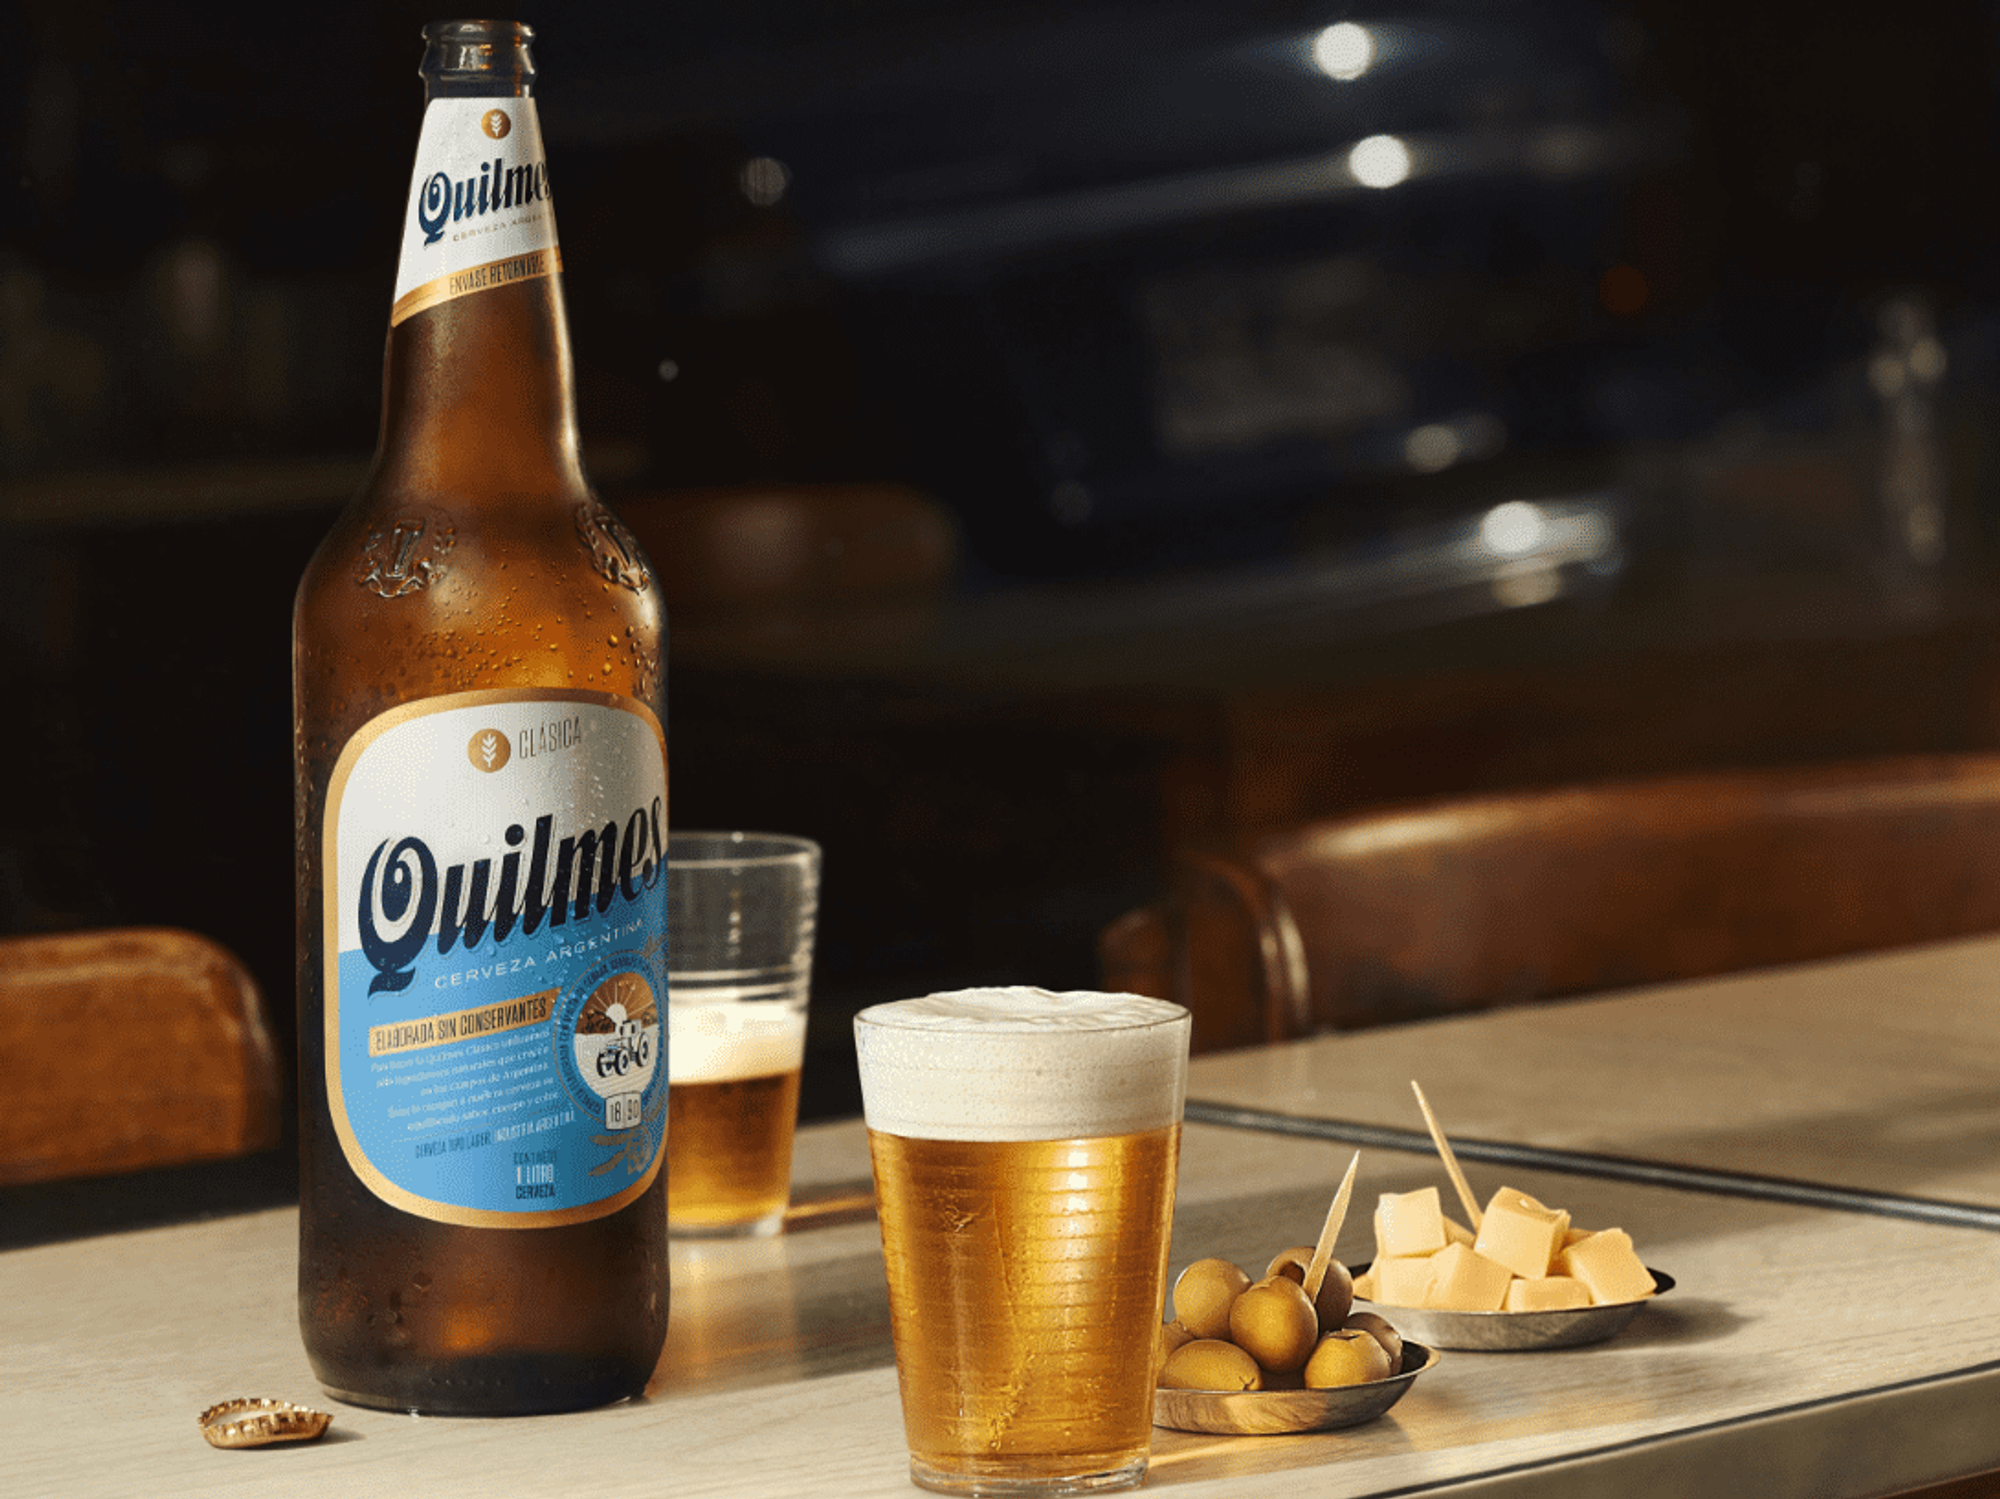 Argentine 'Quilmes' beer on a bar table, with glasses, olives, and cheeses.